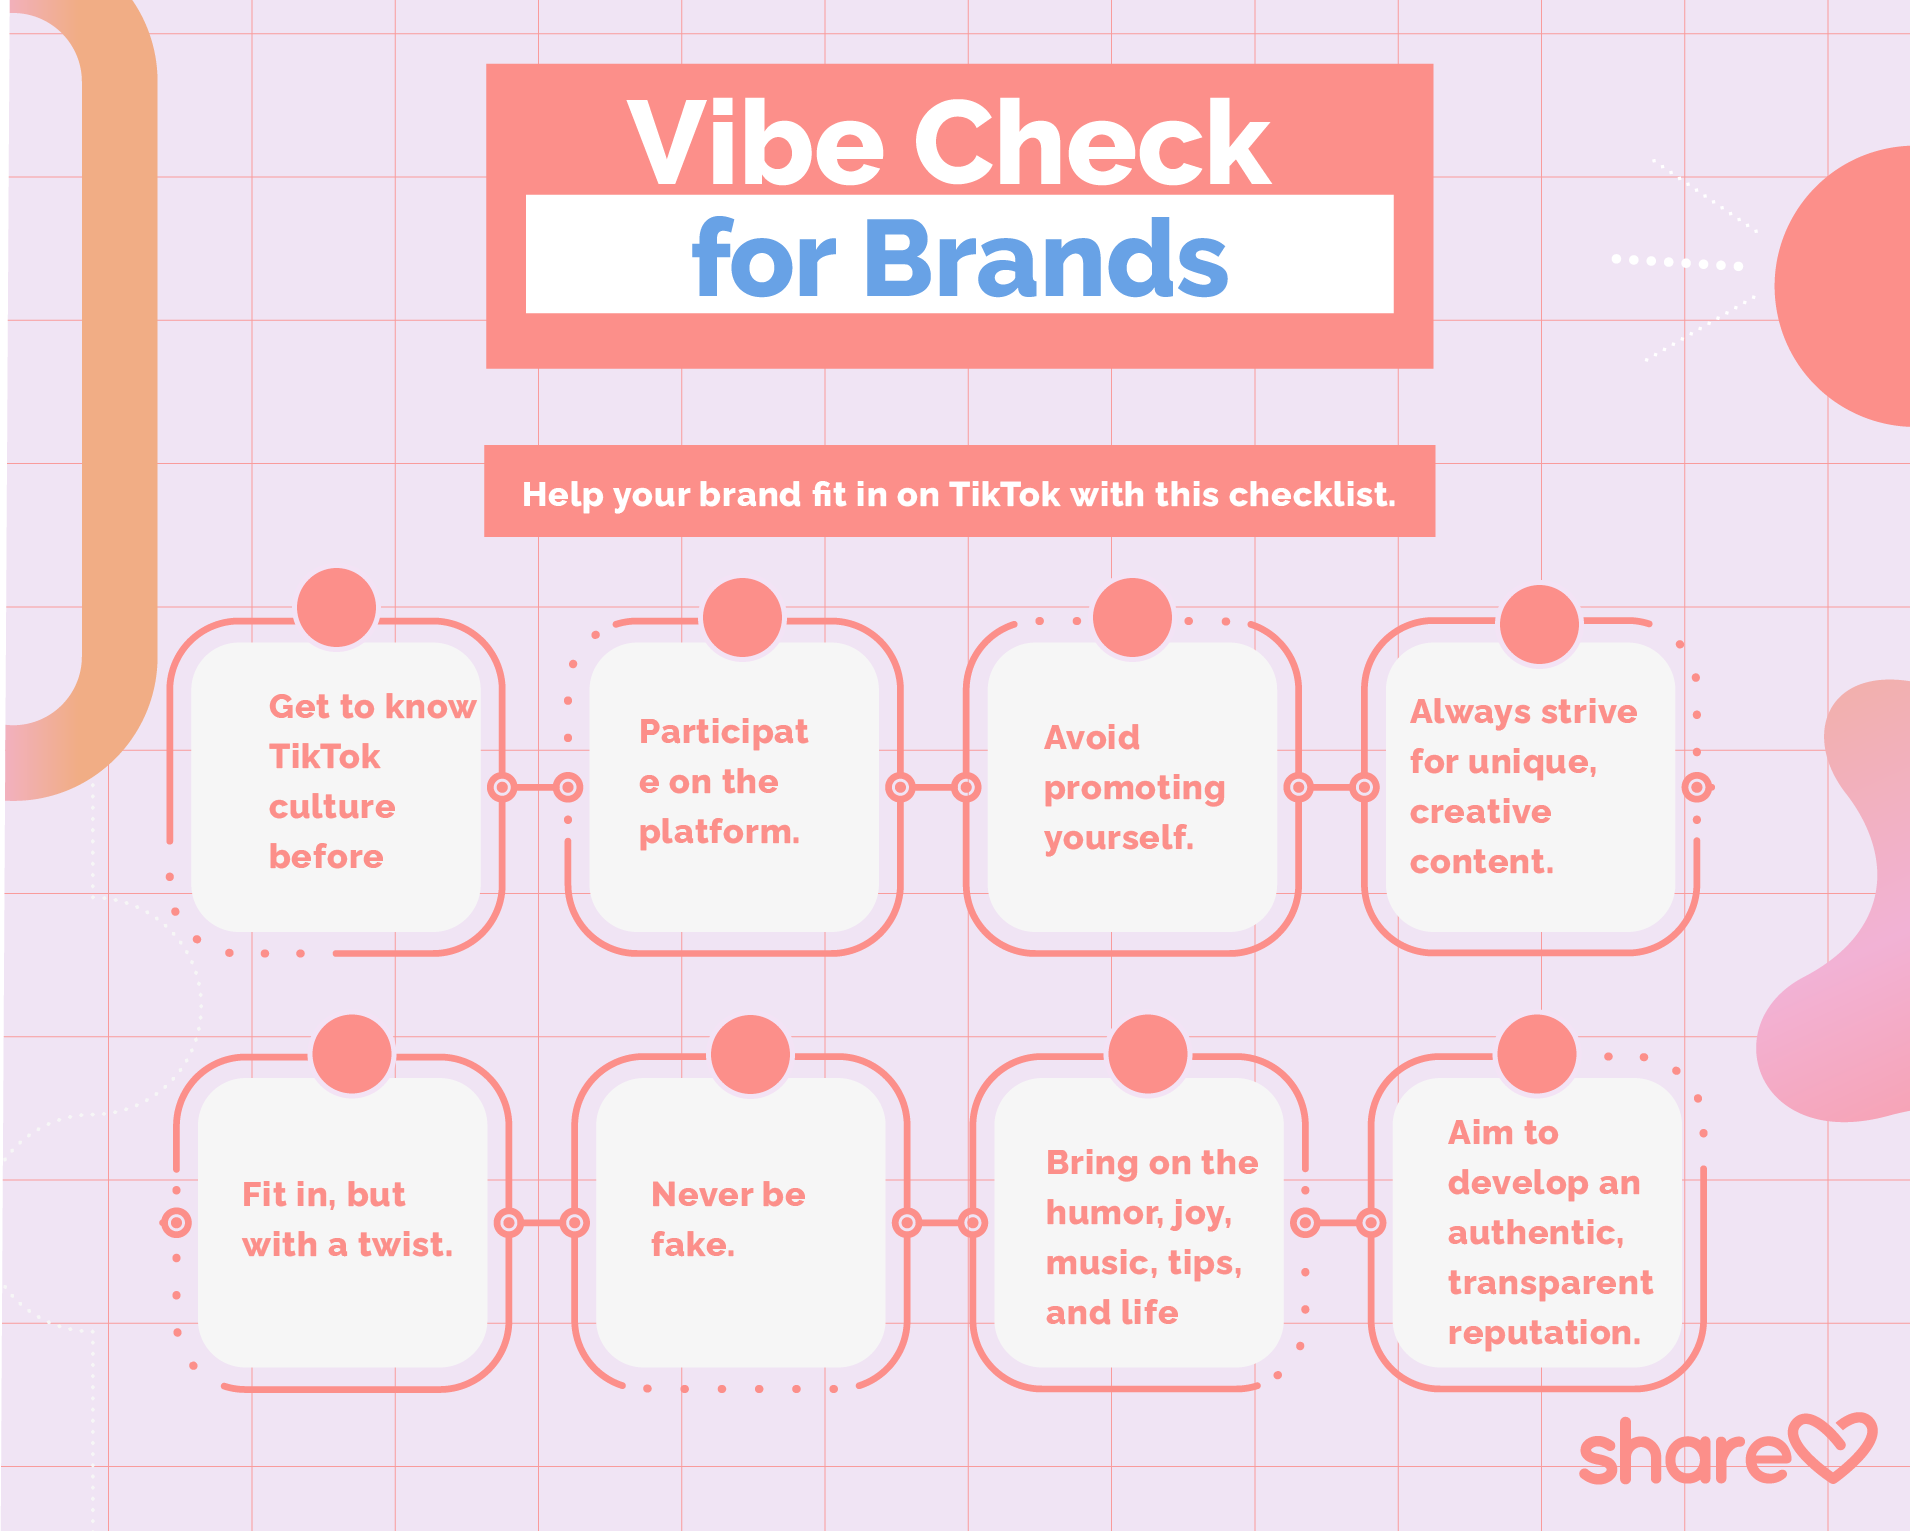 Vibe Check for Brands